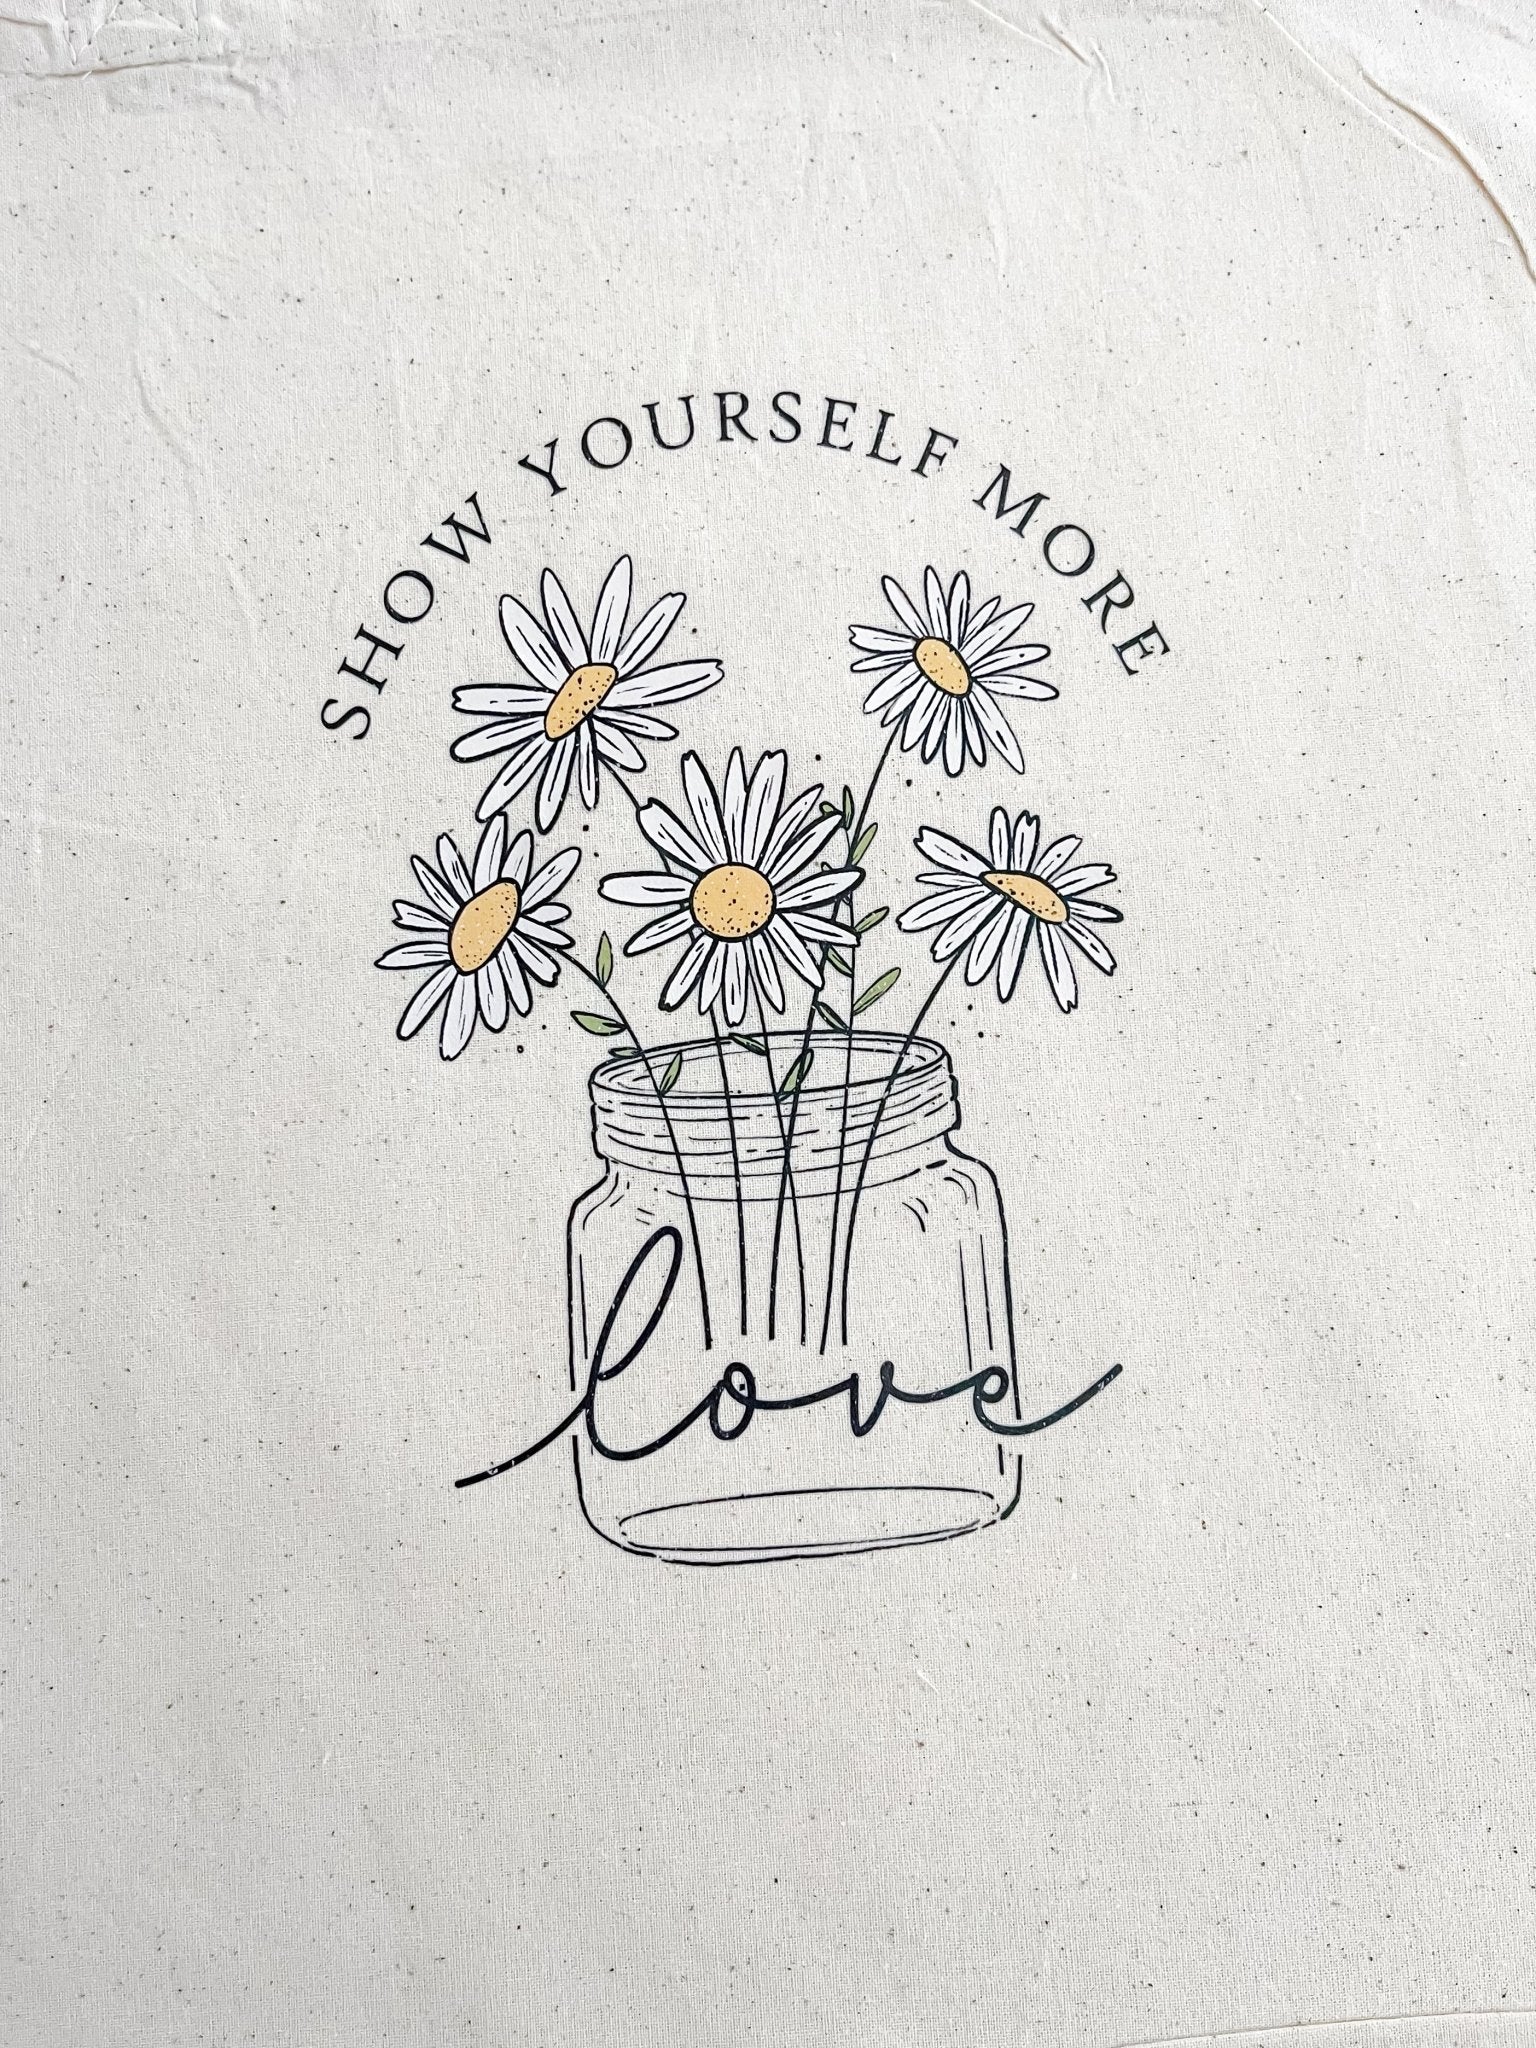 Show Yourself More Love Tote - Designs by Lauren Ann